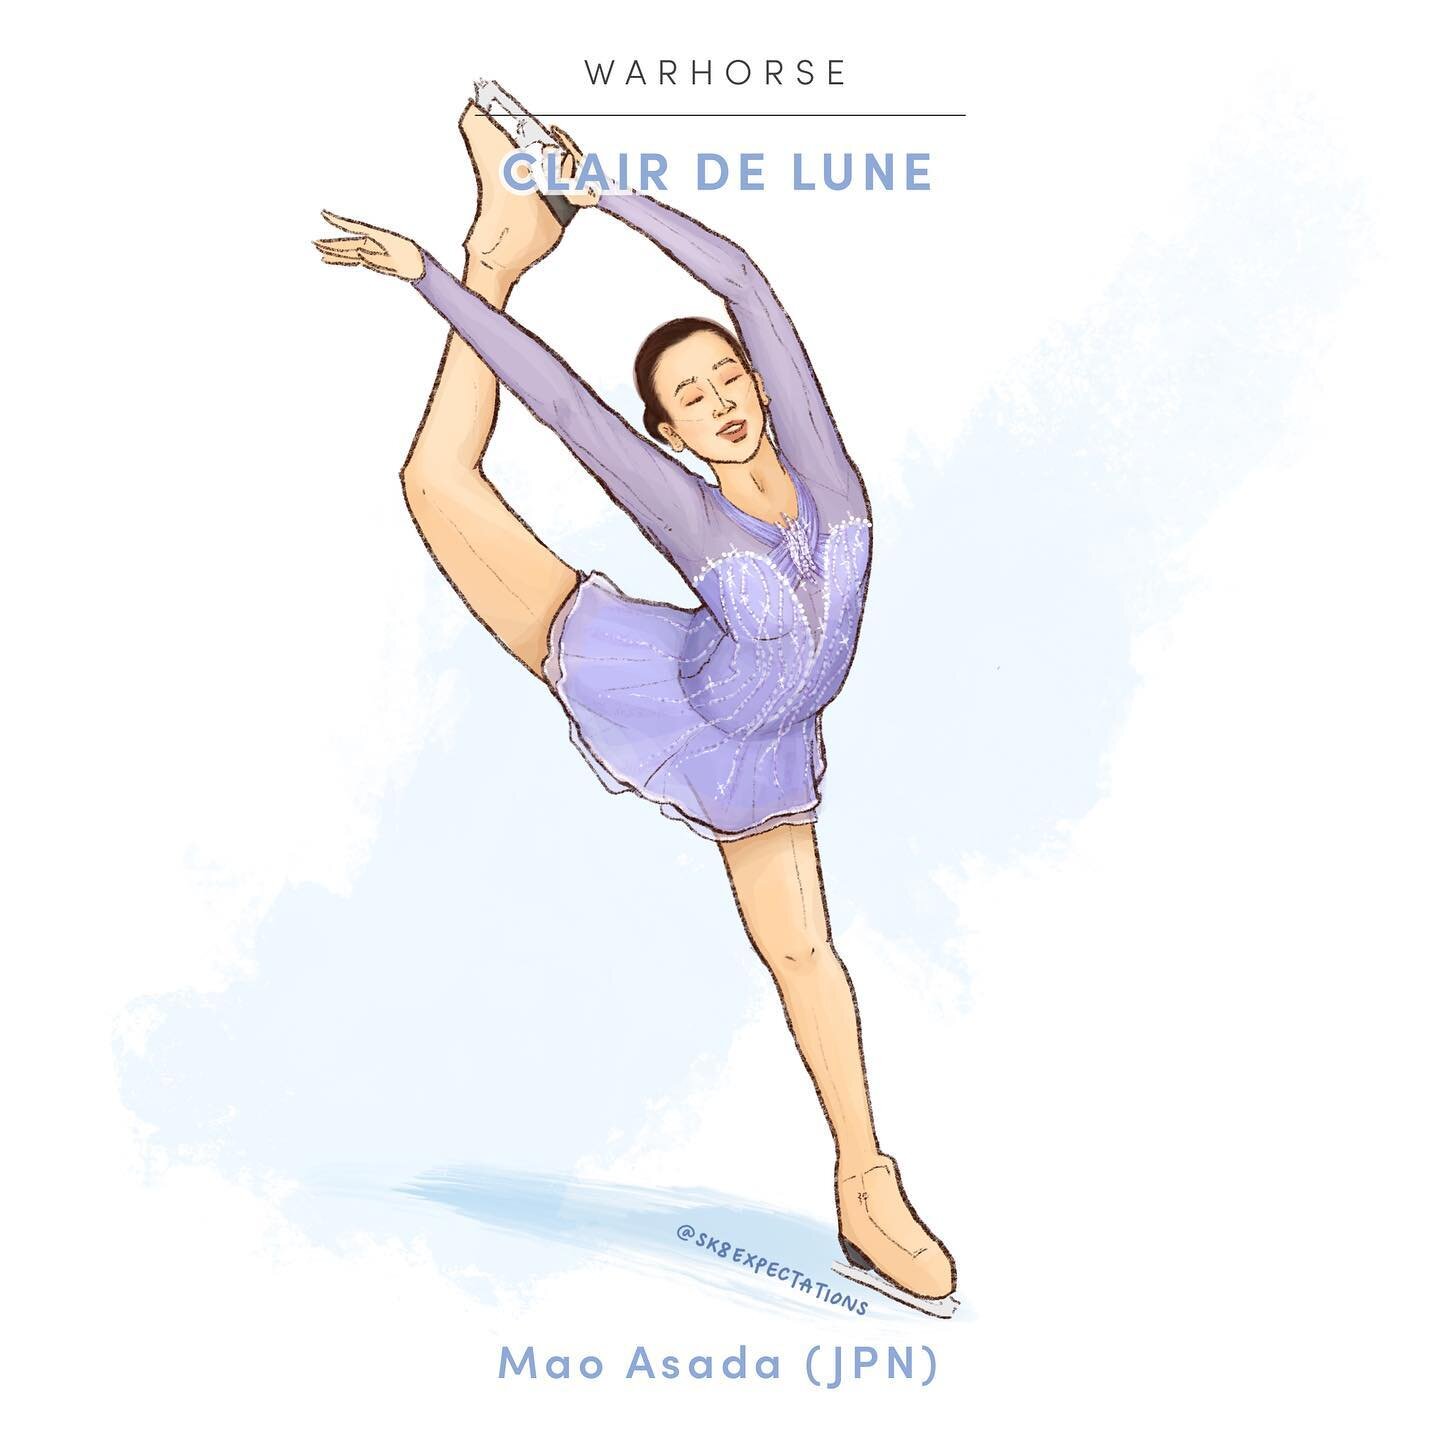 WARHORSE: &ldquo;Clair de Lune&rdquo; (Claude Debussy)
-
Mao Asada (JPN)
-
2009 ISU World Team Trophy, Short Program
-
Choreographed by Lori Nichol
-
This is another in a series of love letters to Mao Asada on our feed. Her &ldquo;Clair de Lune&rdquo